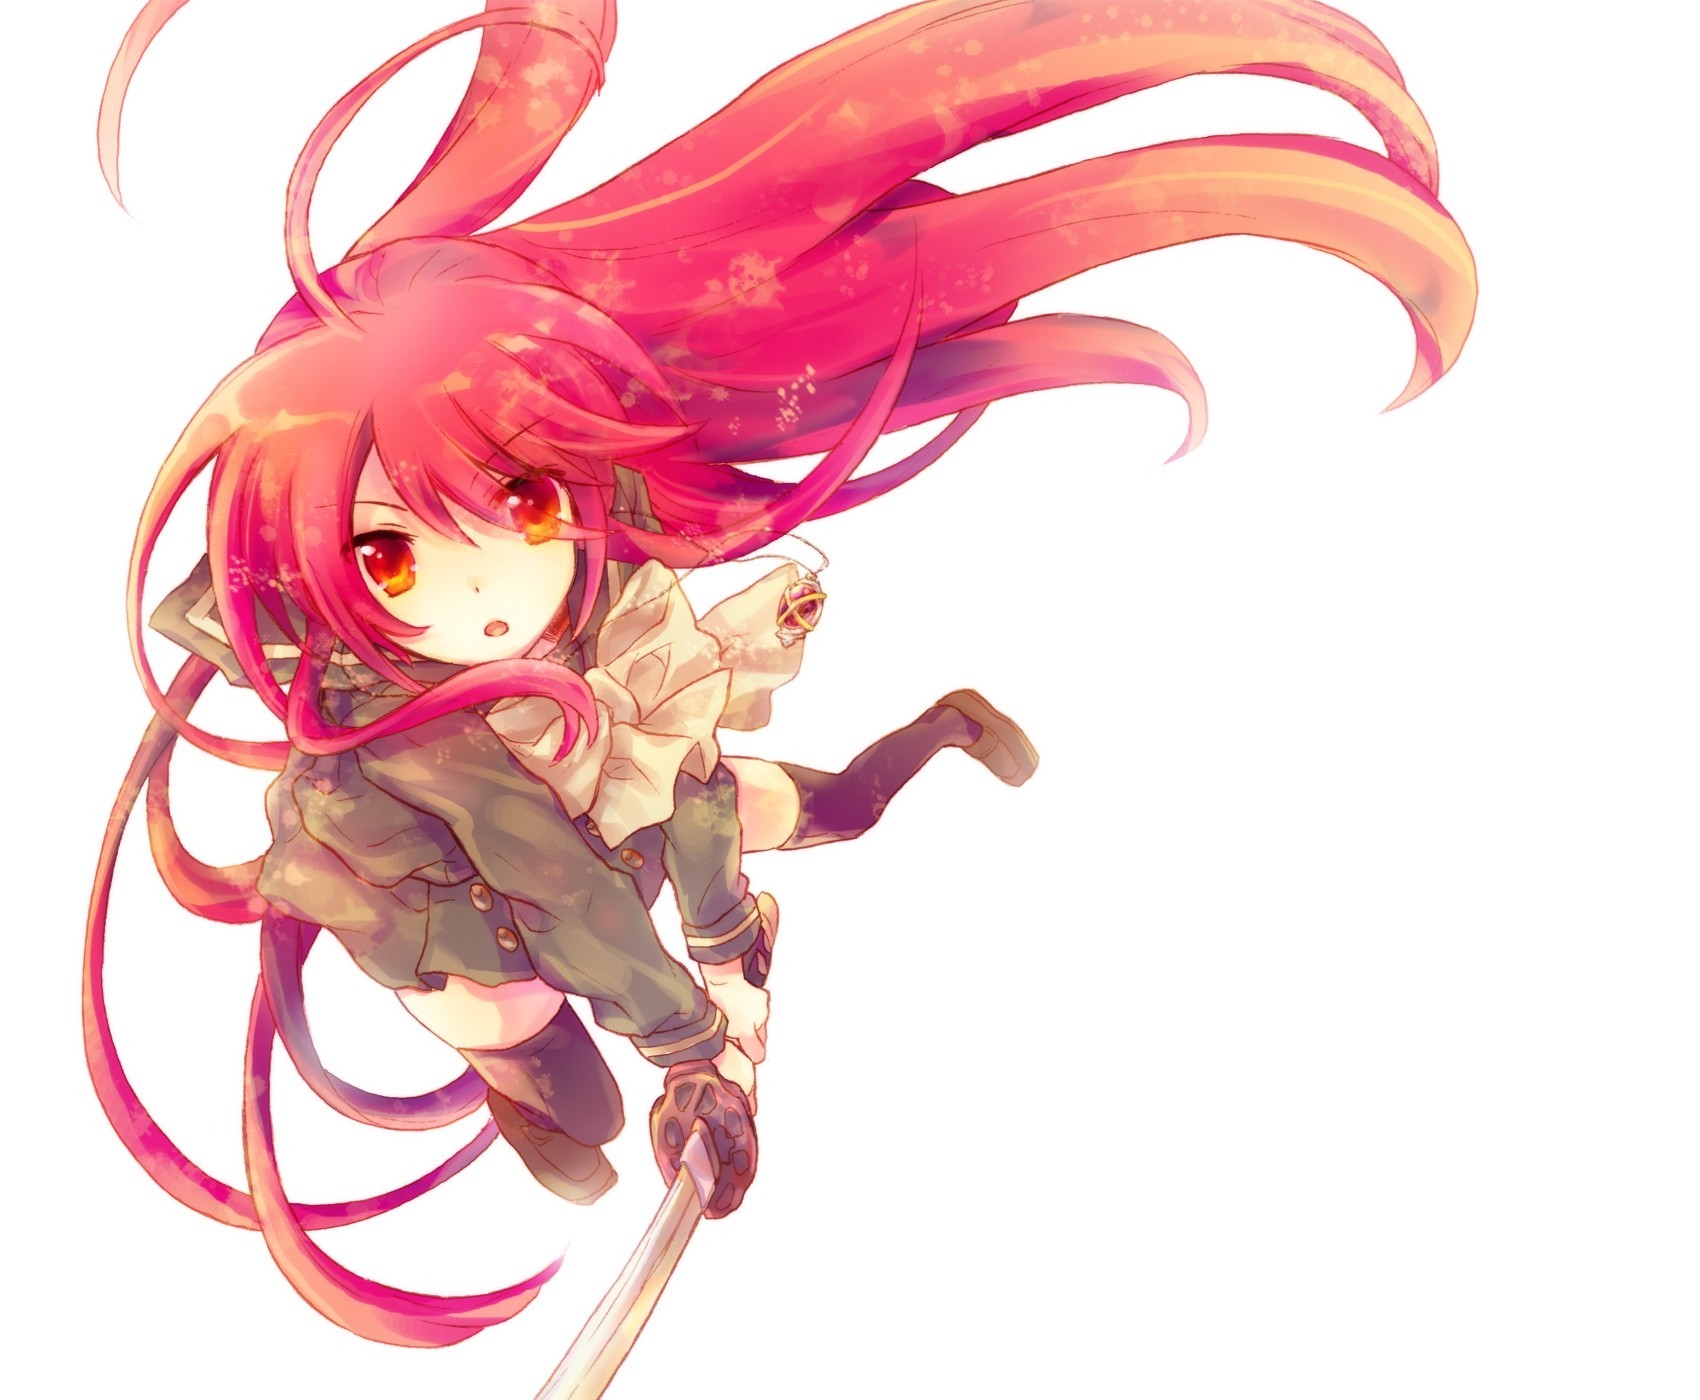 Young Red Haired Anime Girl - HD Wallpaper 